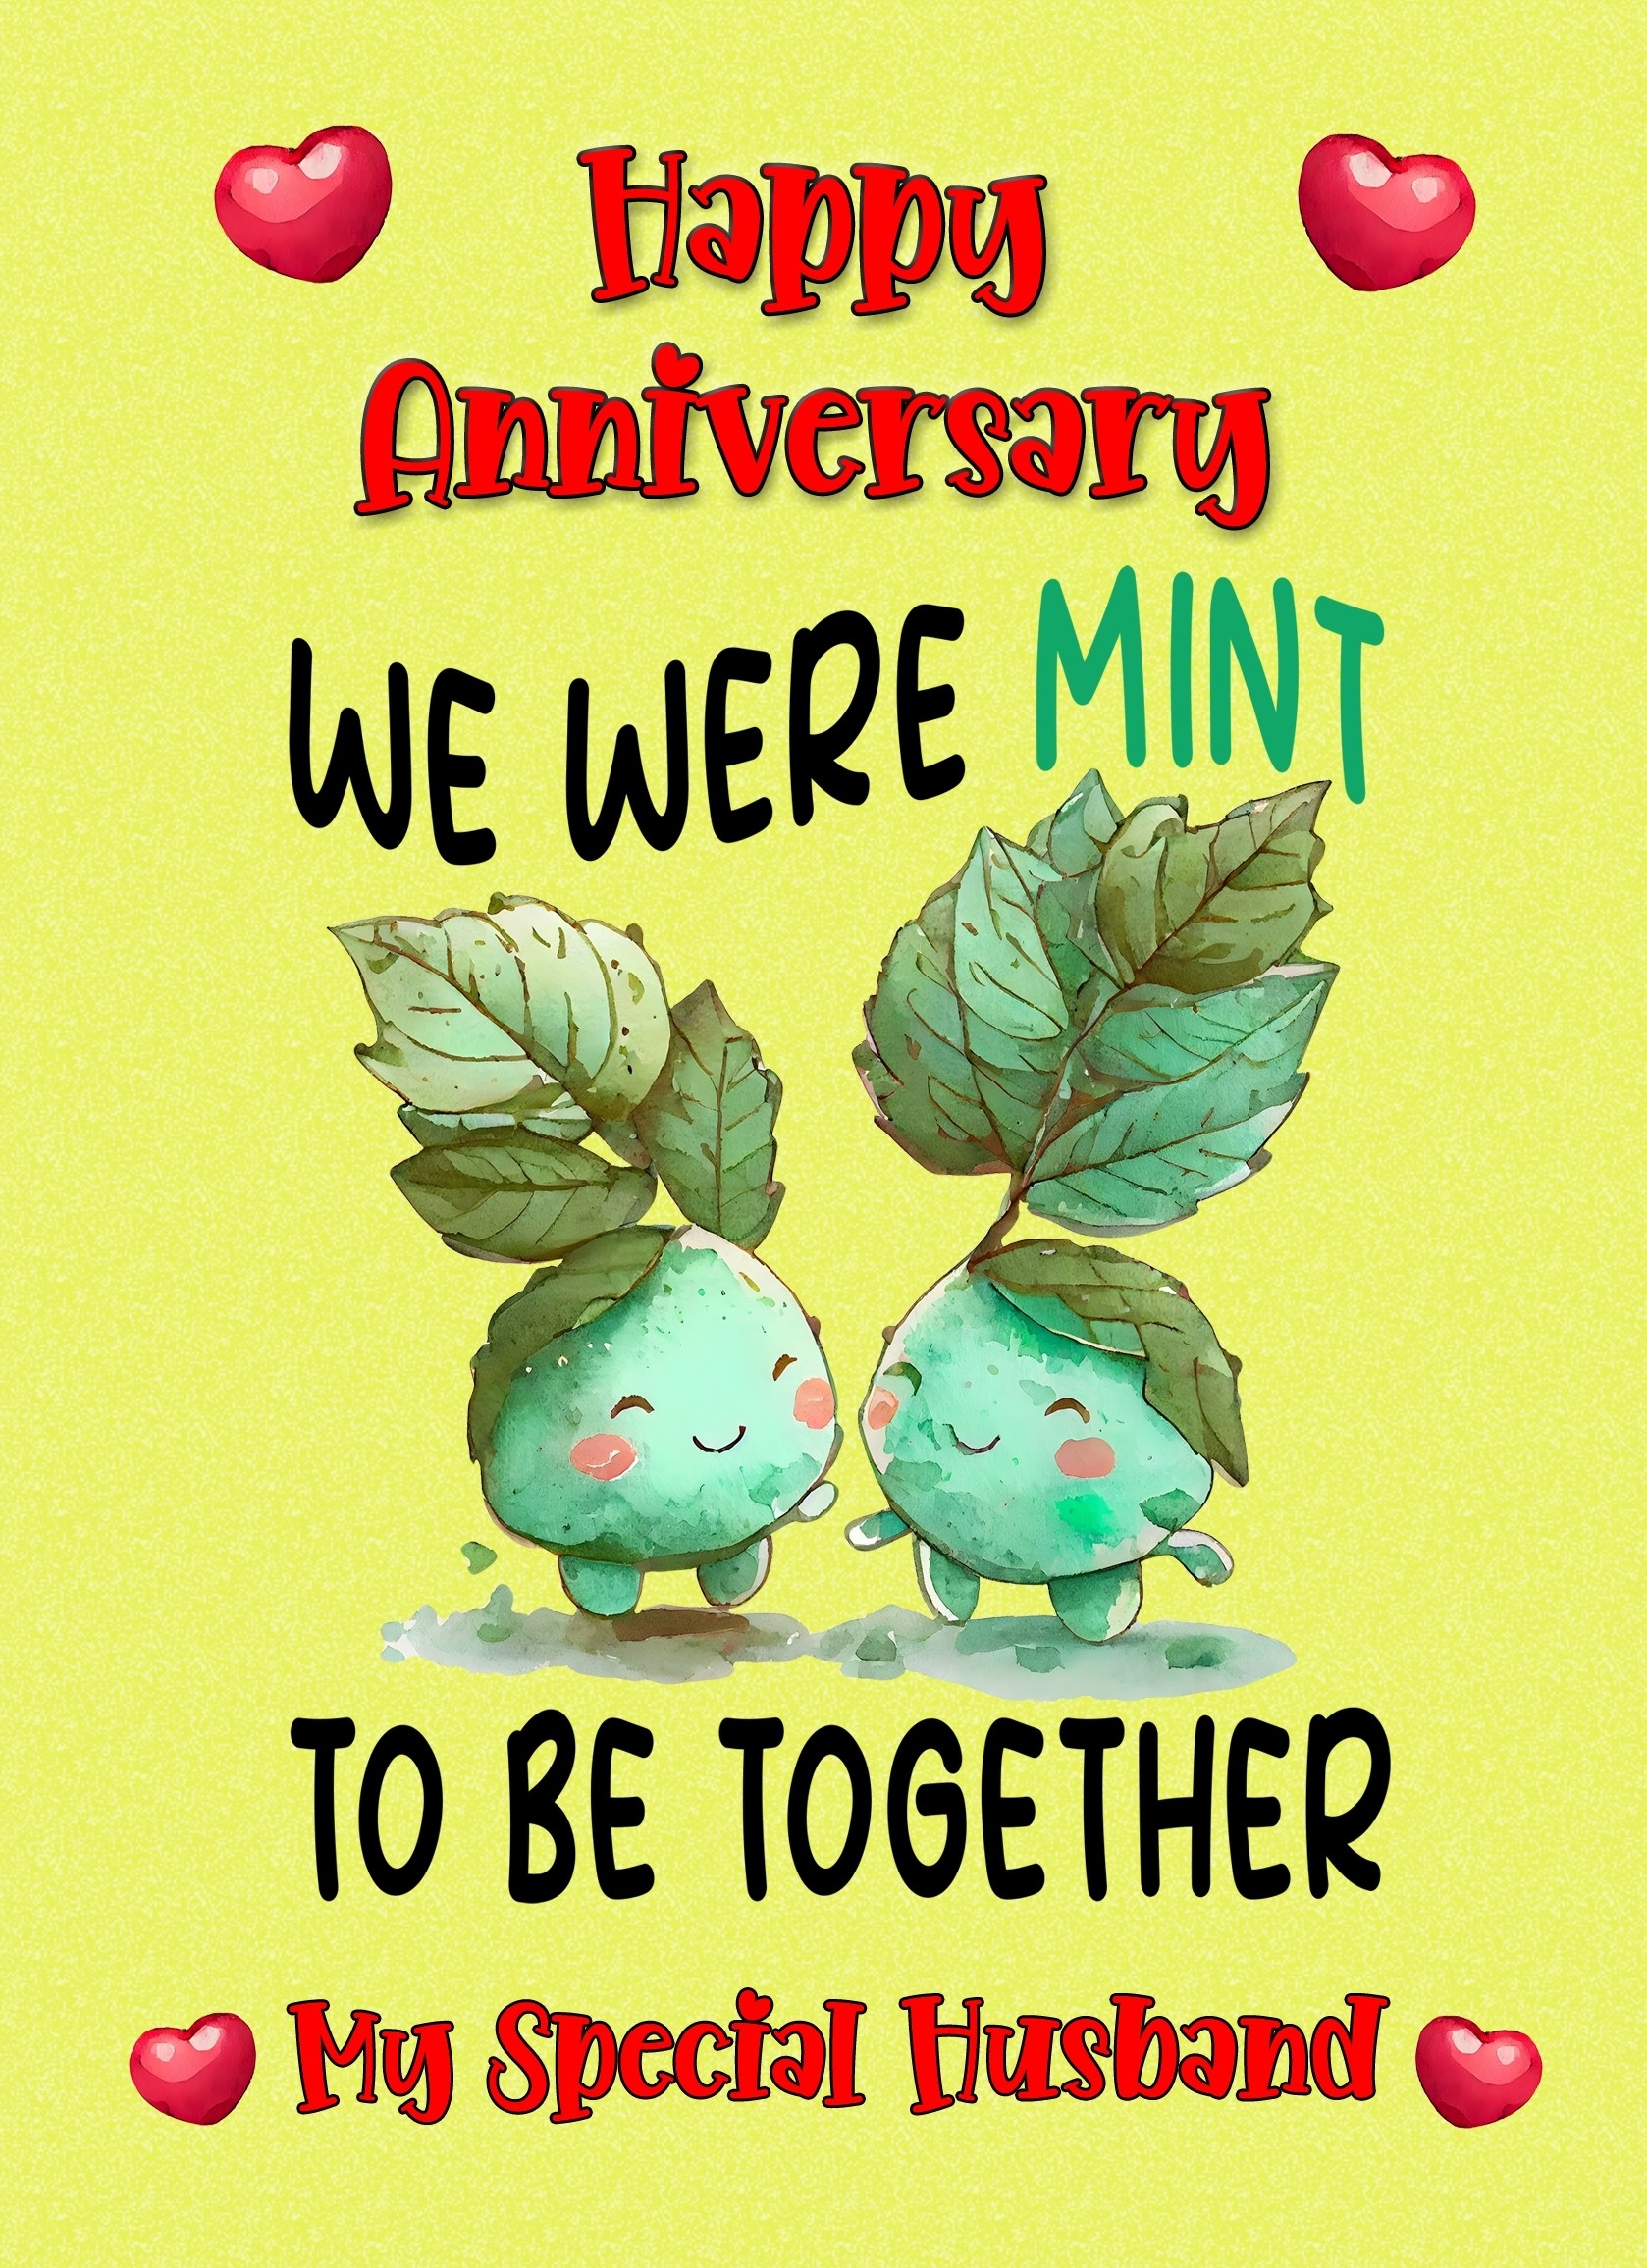 Funny Pun Romantic Anniversary Card for Husband (Mint to Be)